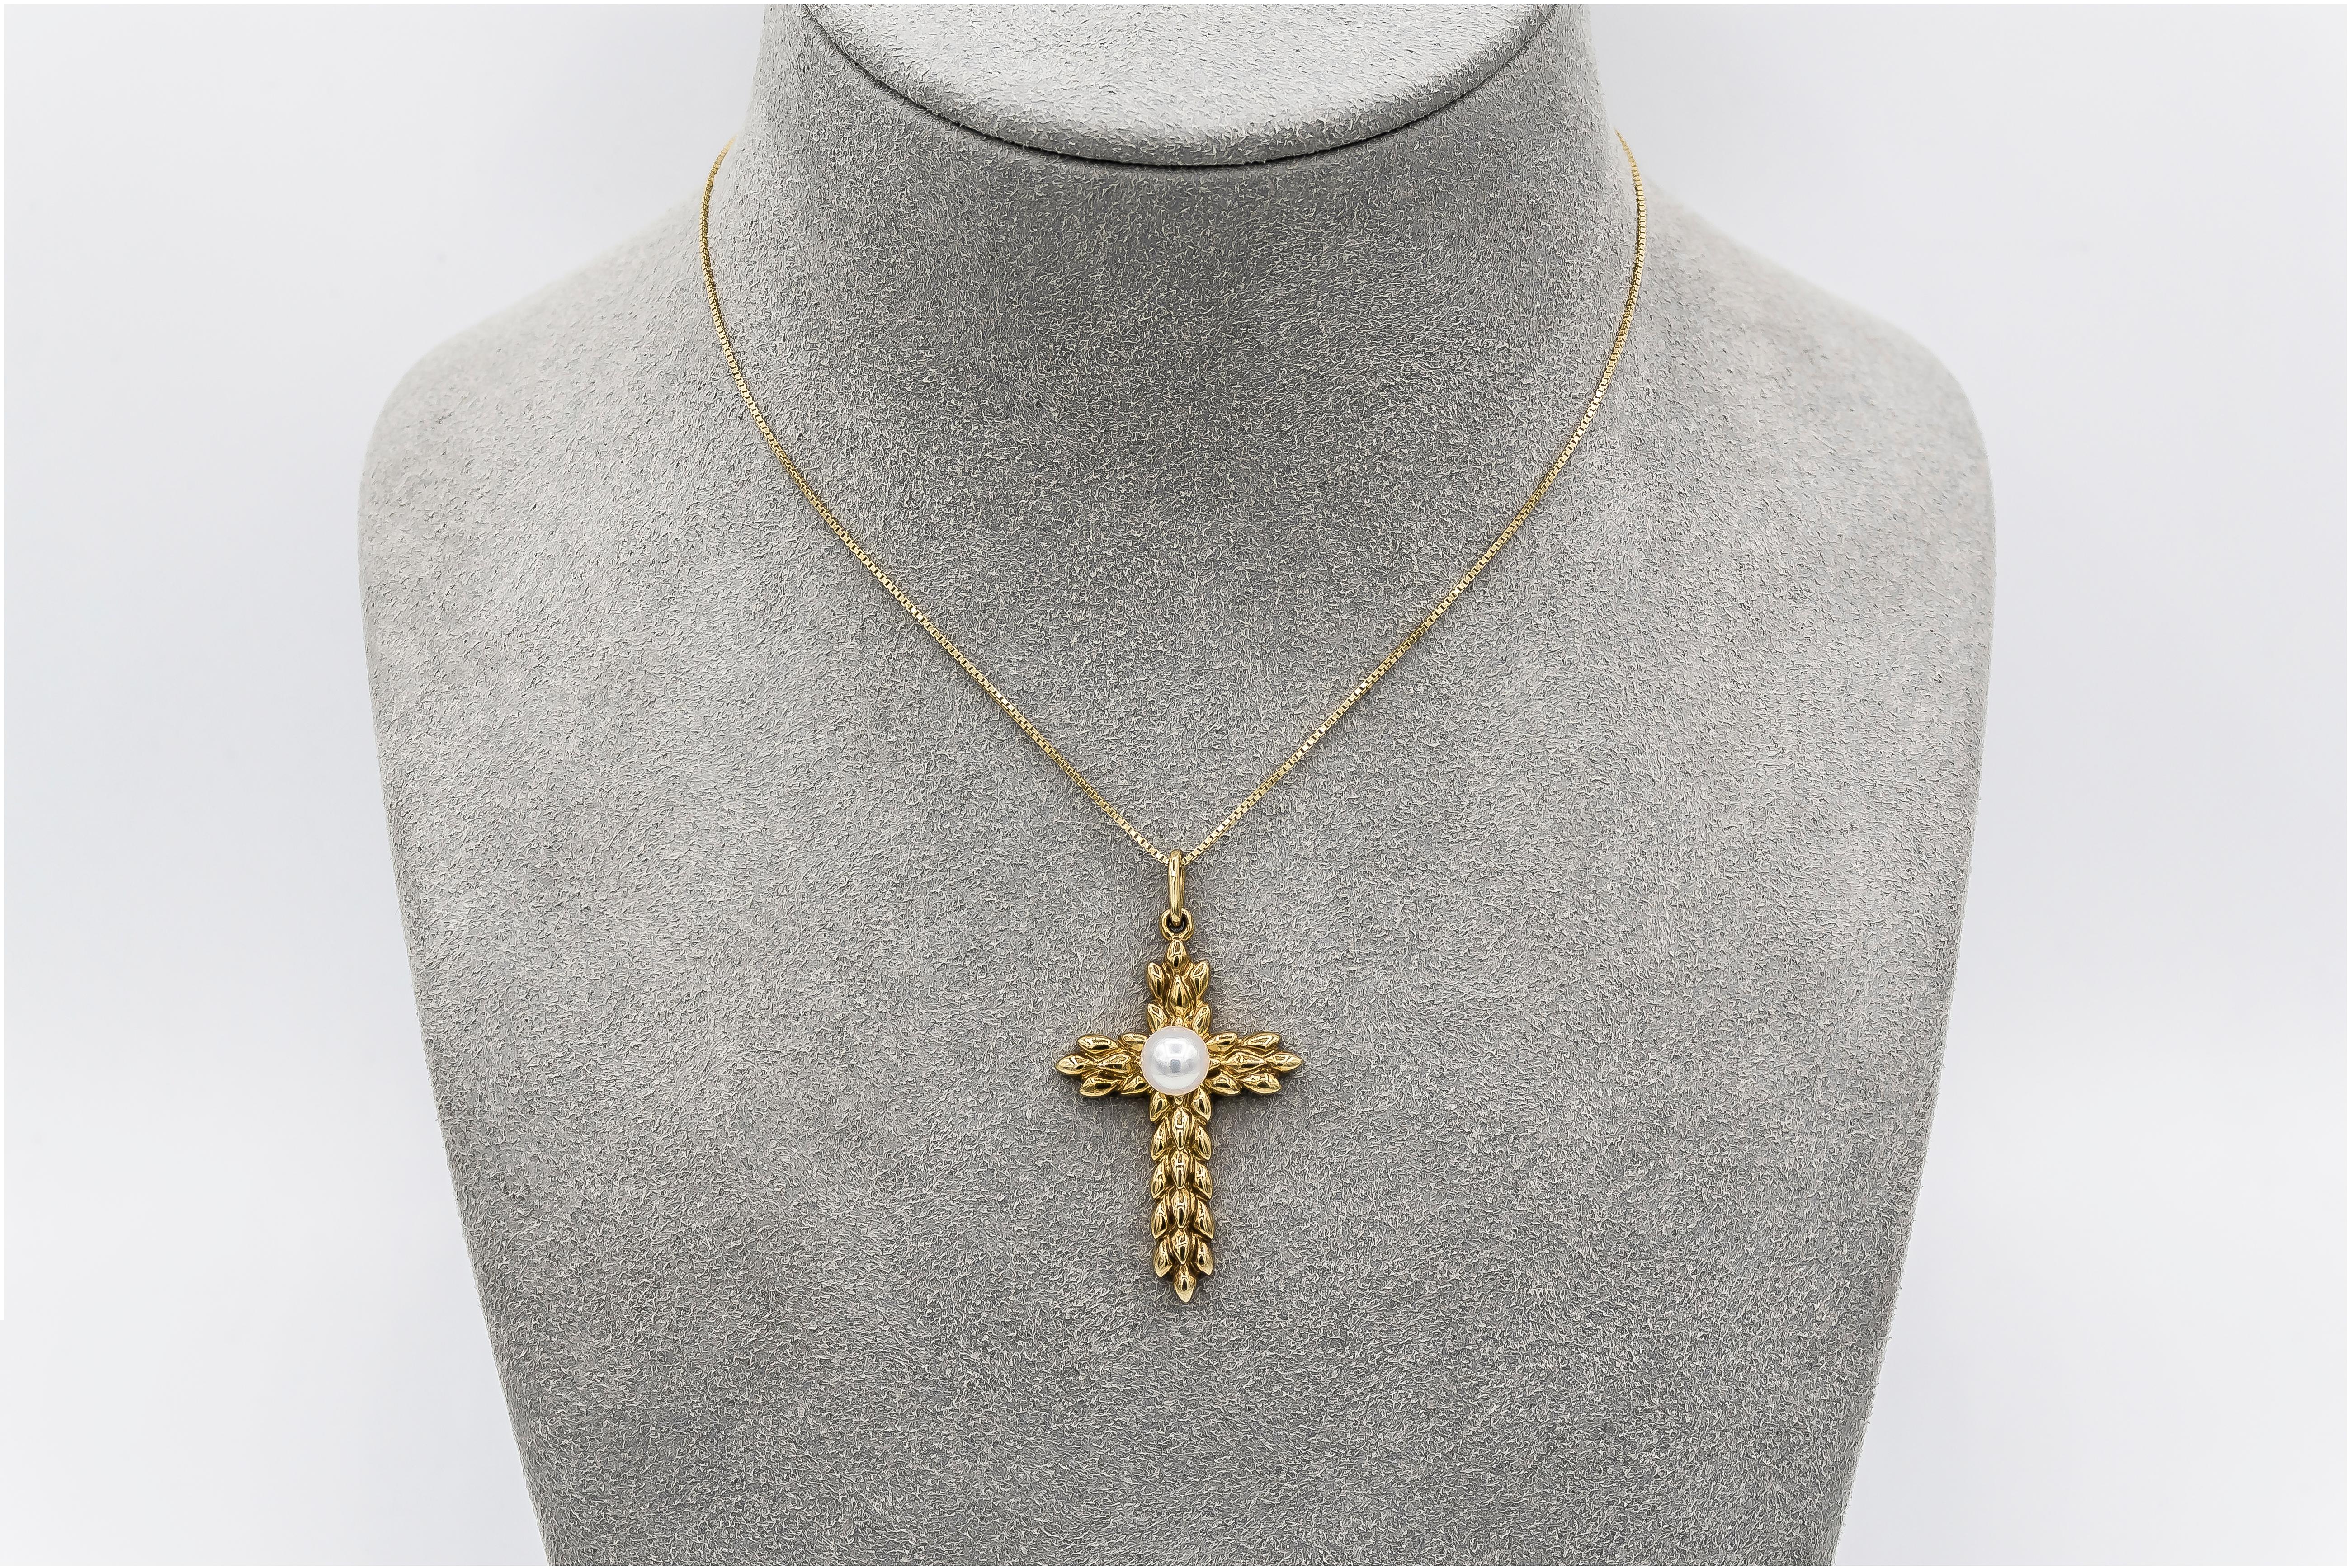 18 karat yellow gold pendant necklace showcasing a cross made with gold leaves, set with a pearl center.  Attached to an 18 inch yellow gold chain. Made and signed by Tiffany & Co. 